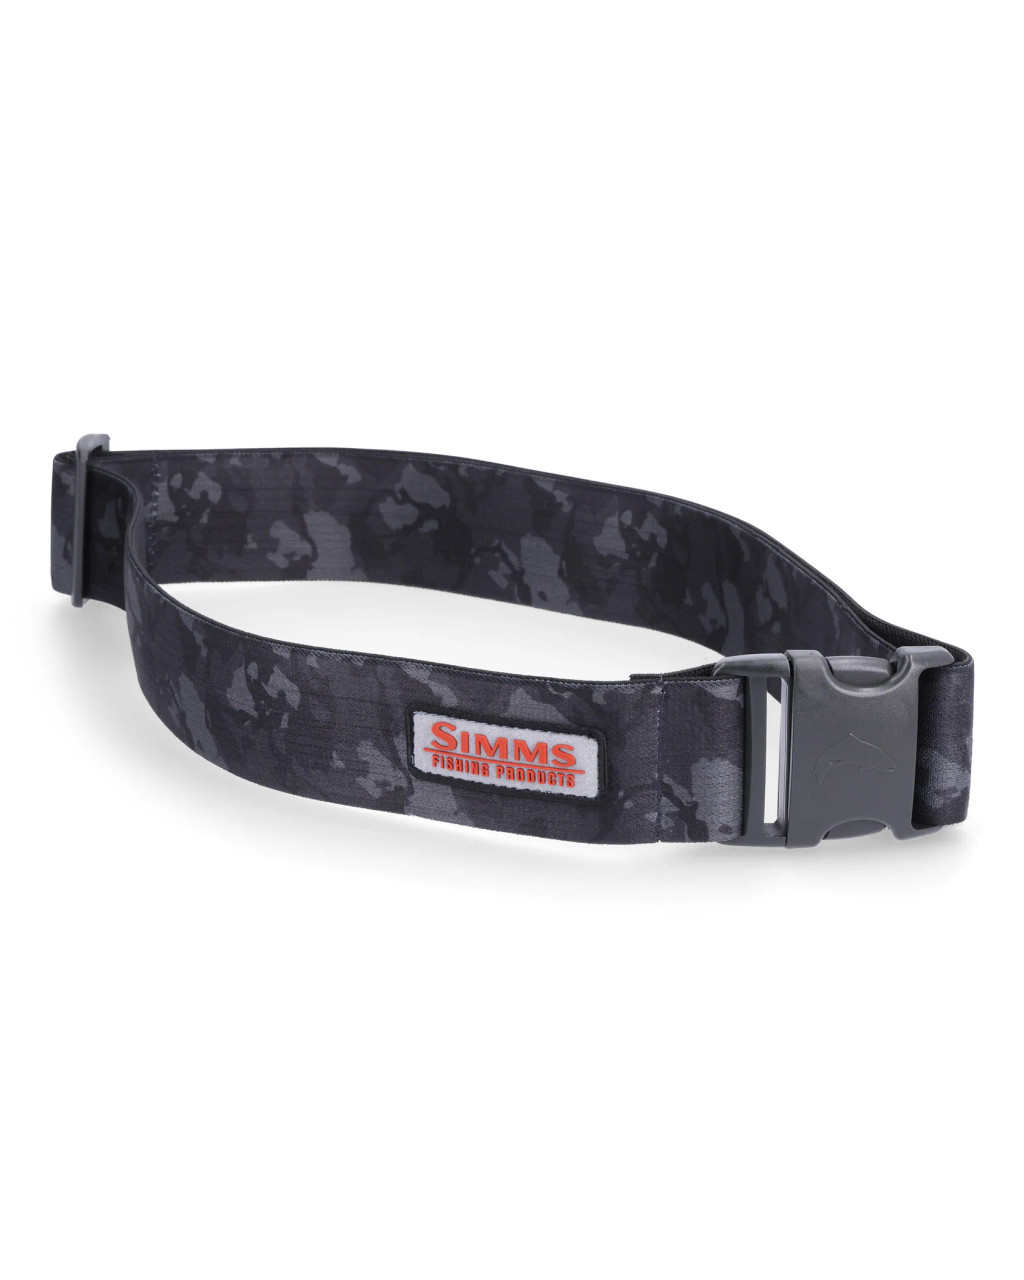 Best Wading Belt For Sale - Fast And Free Shipping!